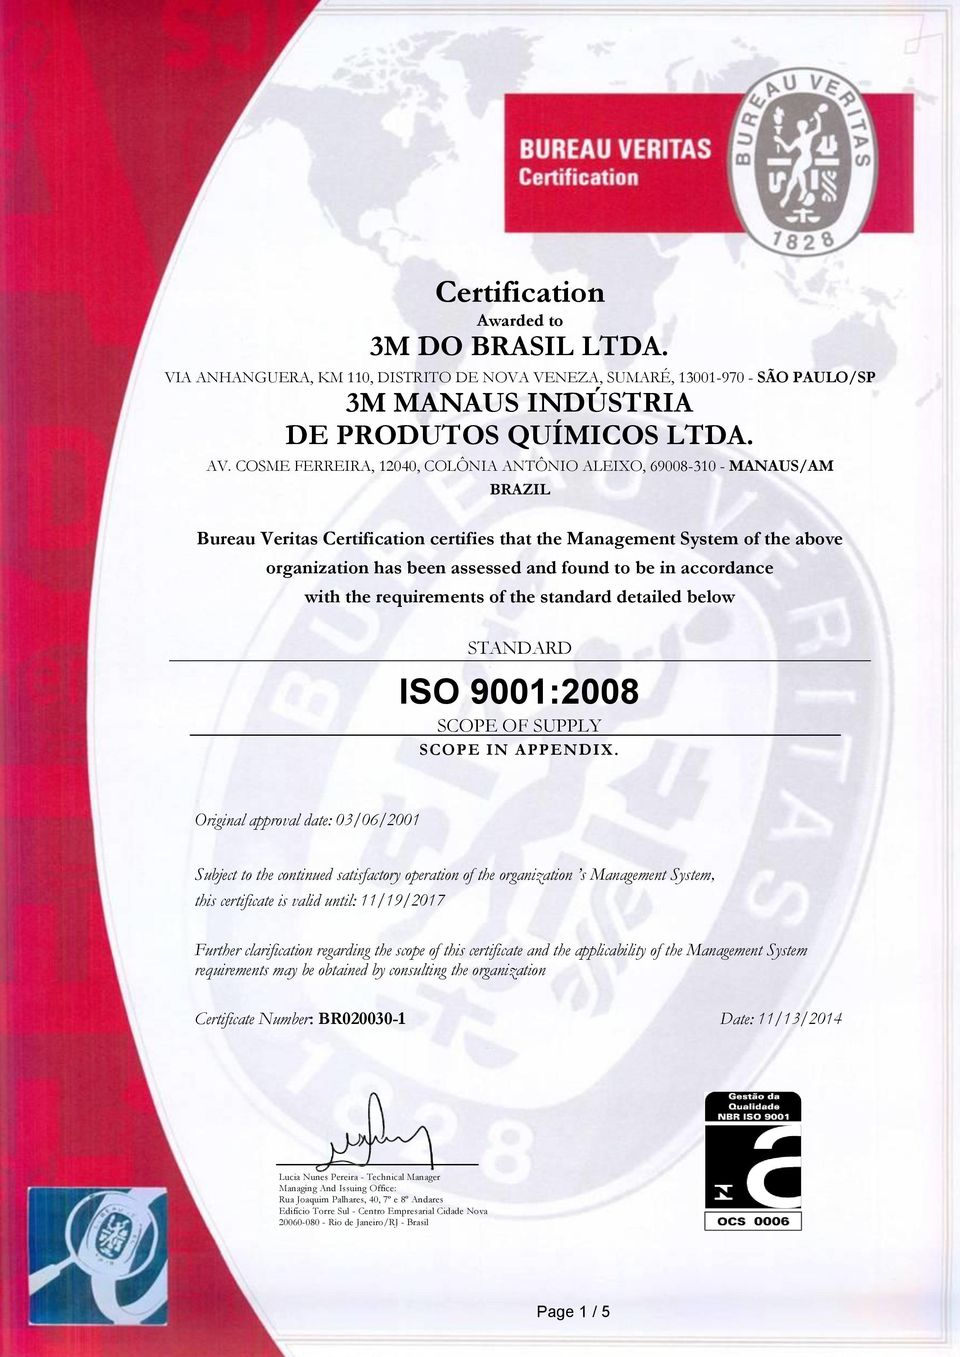 Original approval date: 03/06/2001 Subject to the continued satisfactory operation of the organization s Management System, this certificate is valid